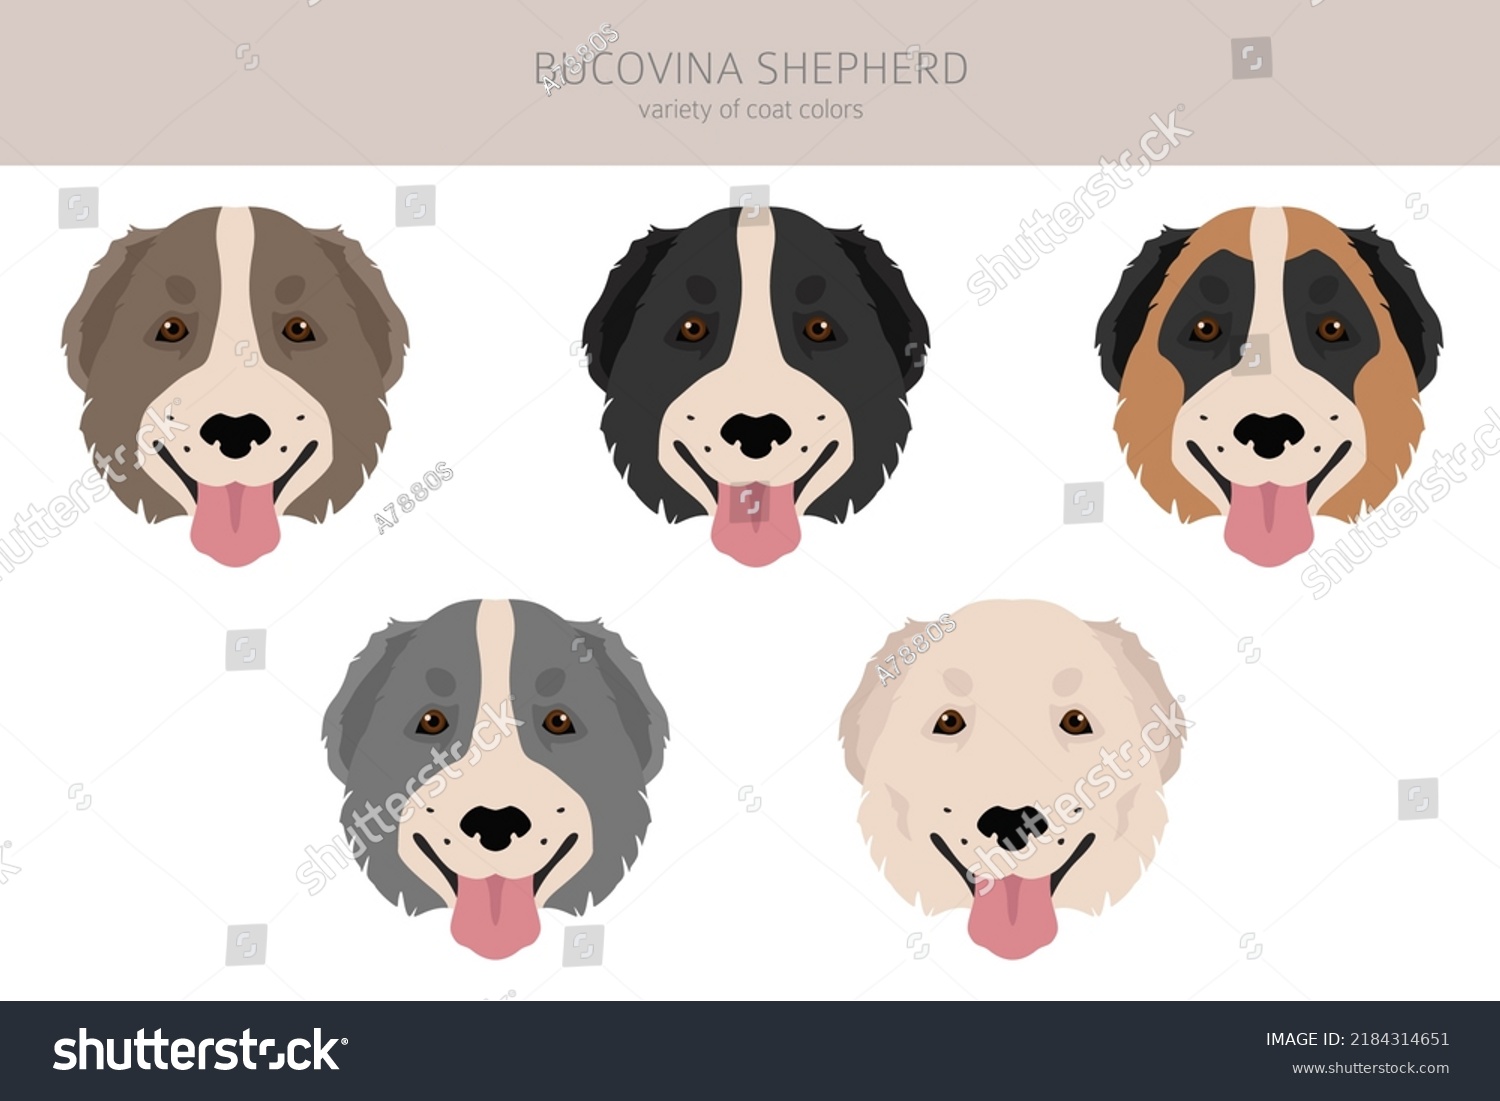 SVG of Bucovina shepherd clipart. Different coat colors and poses set.  Vector illustration svg